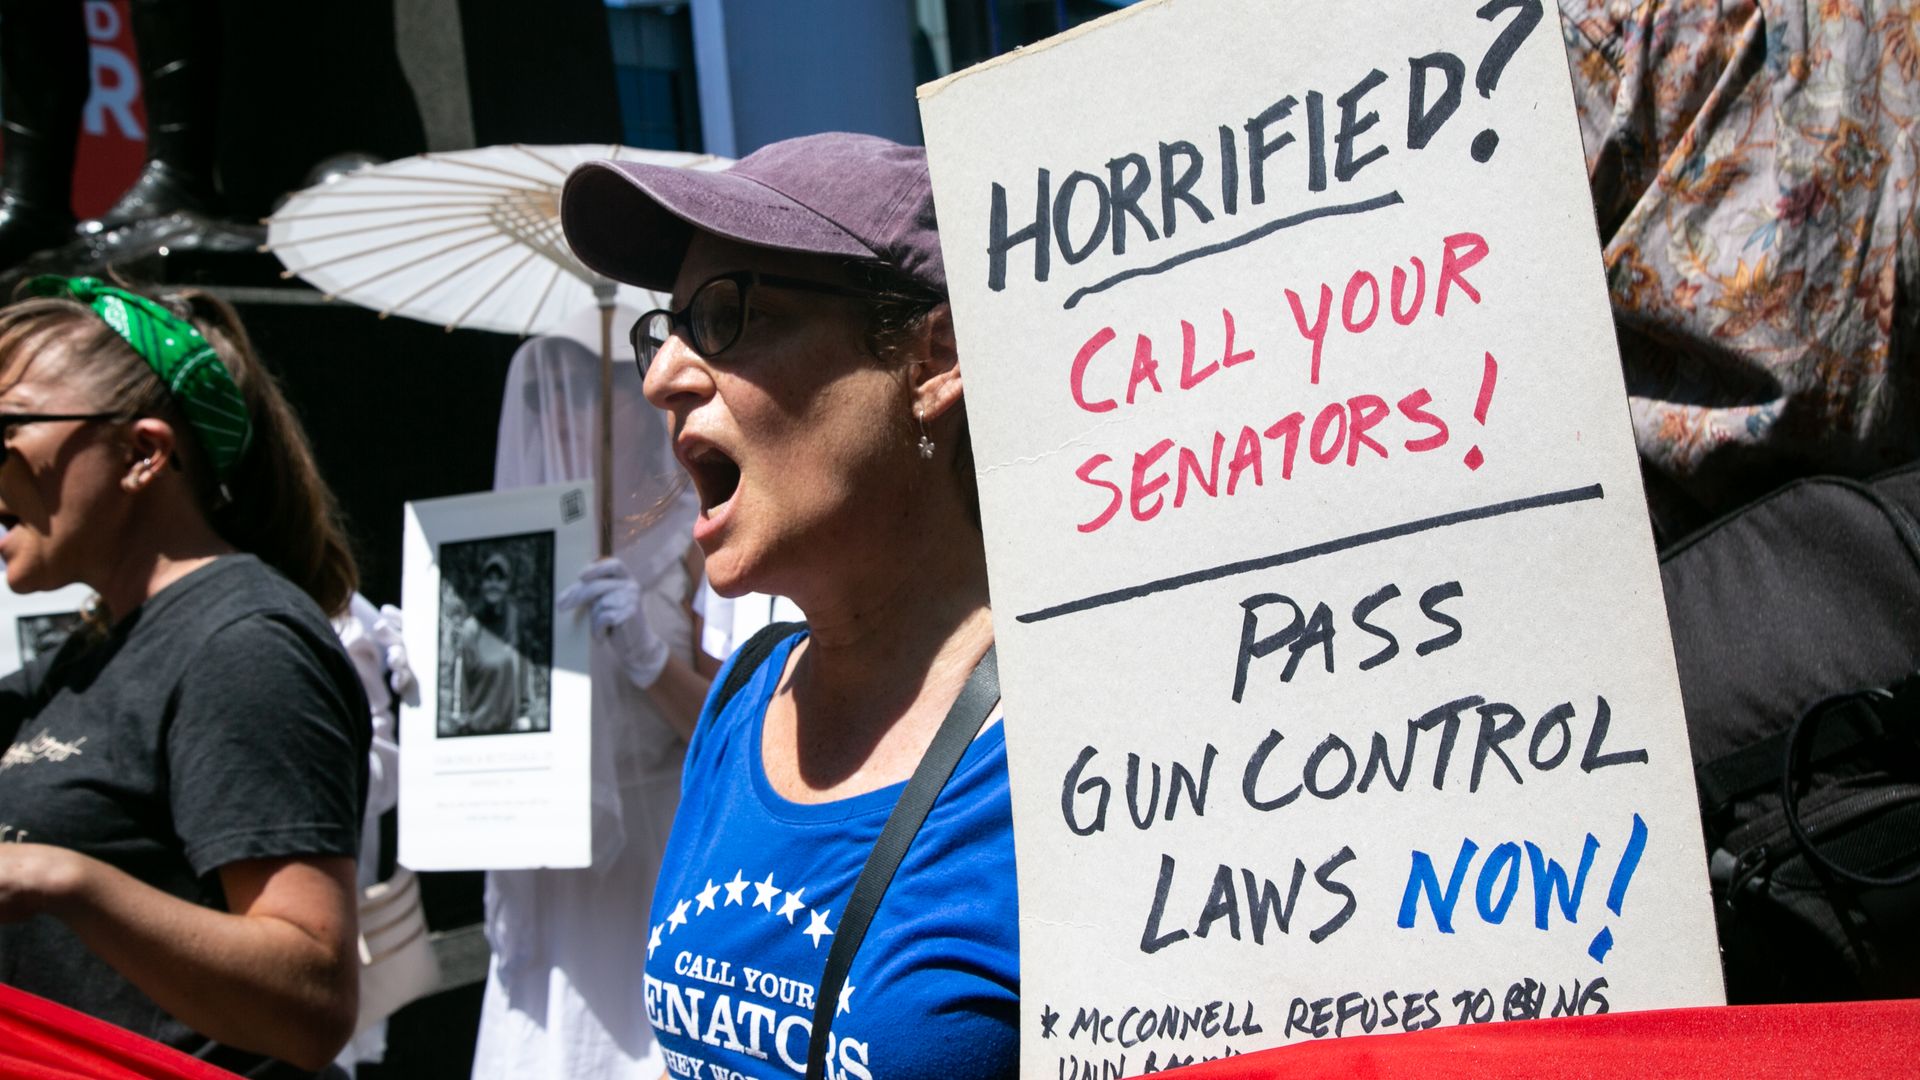 Picture of a woman at a protest holding a sign that says, "horrified? call your senators! pass gun control laws now!"